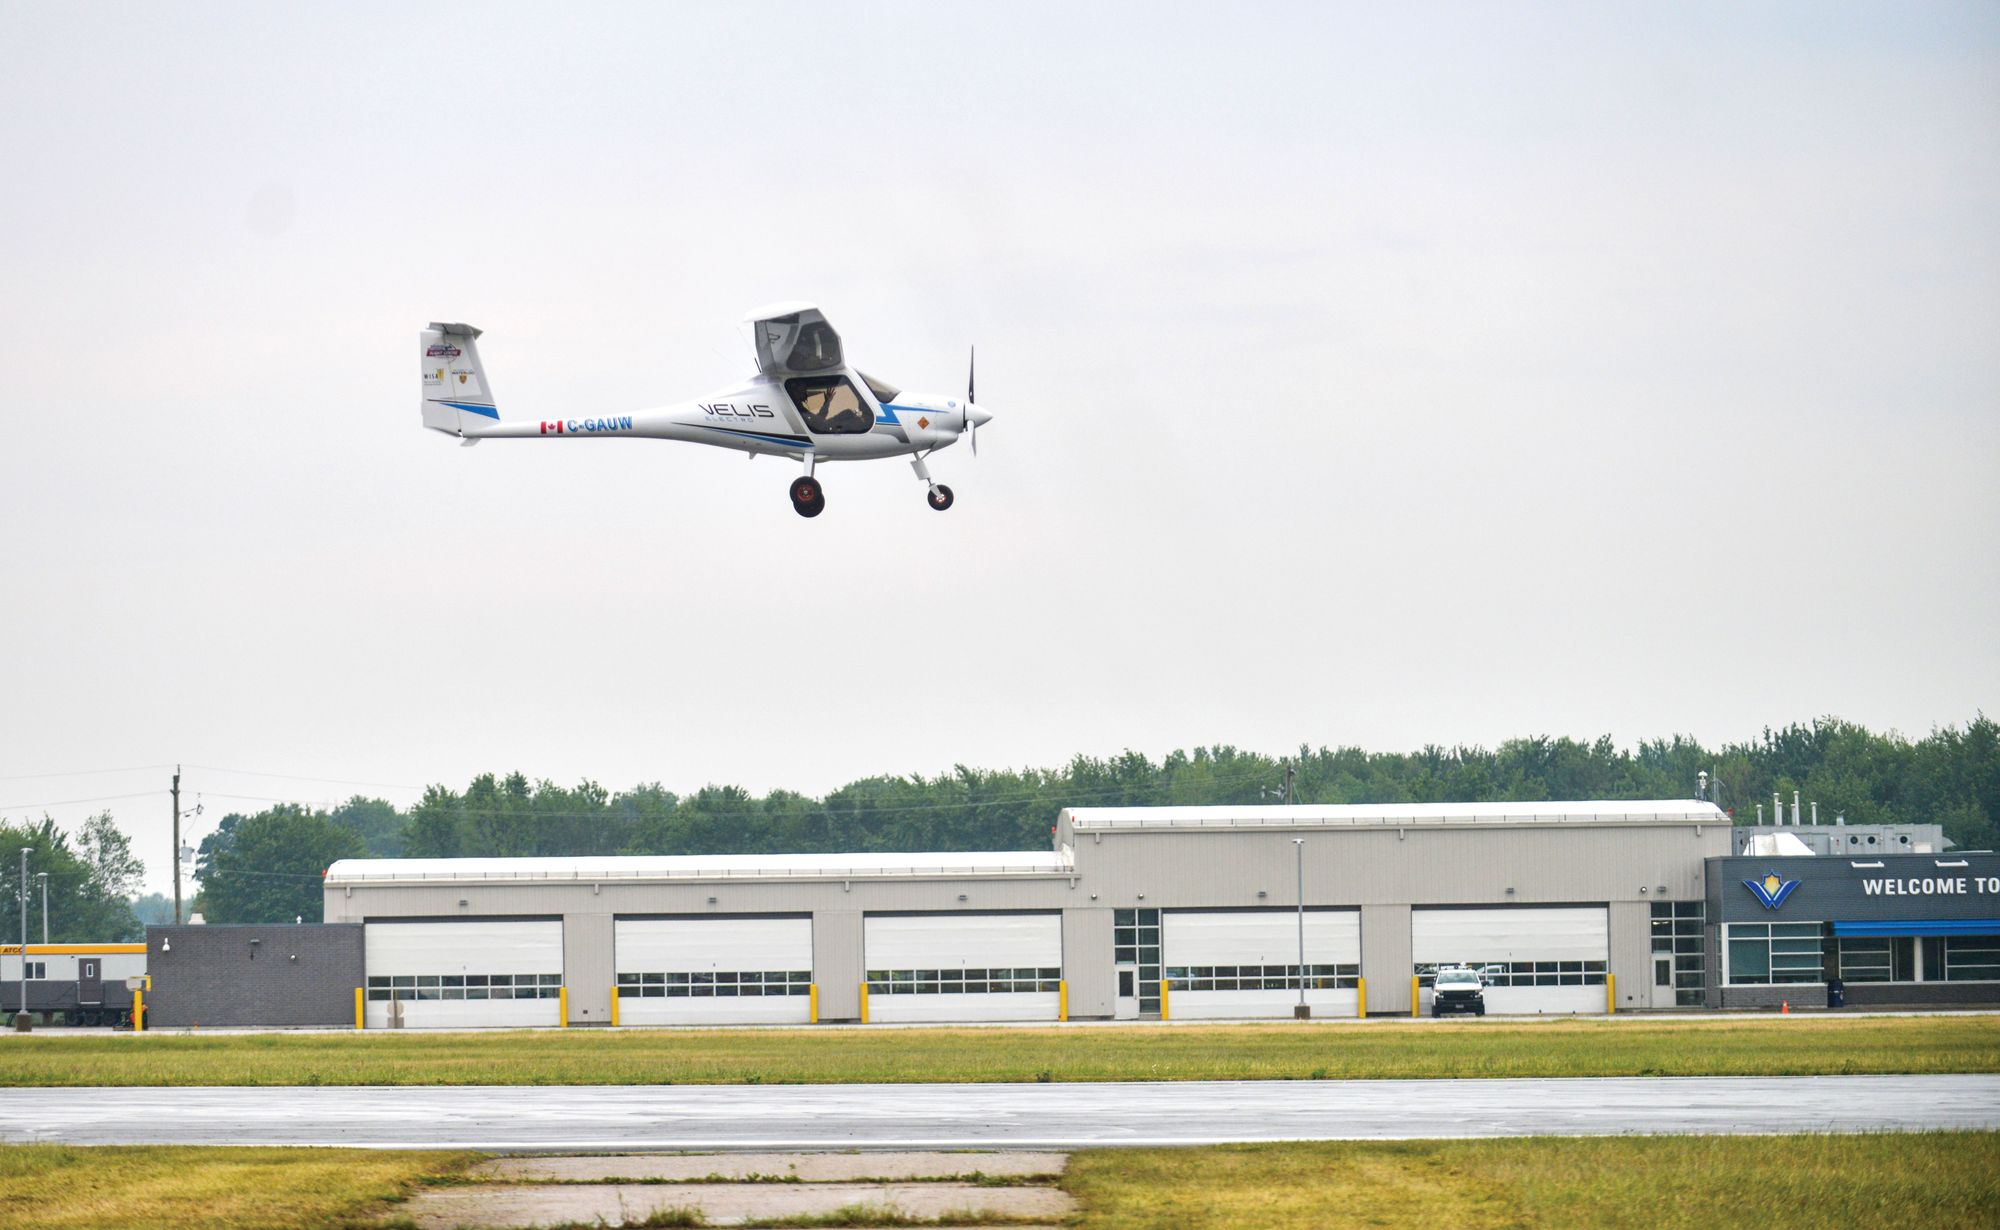                      Canada’s first electric training aircraft takes flight in Breslau                             
                     